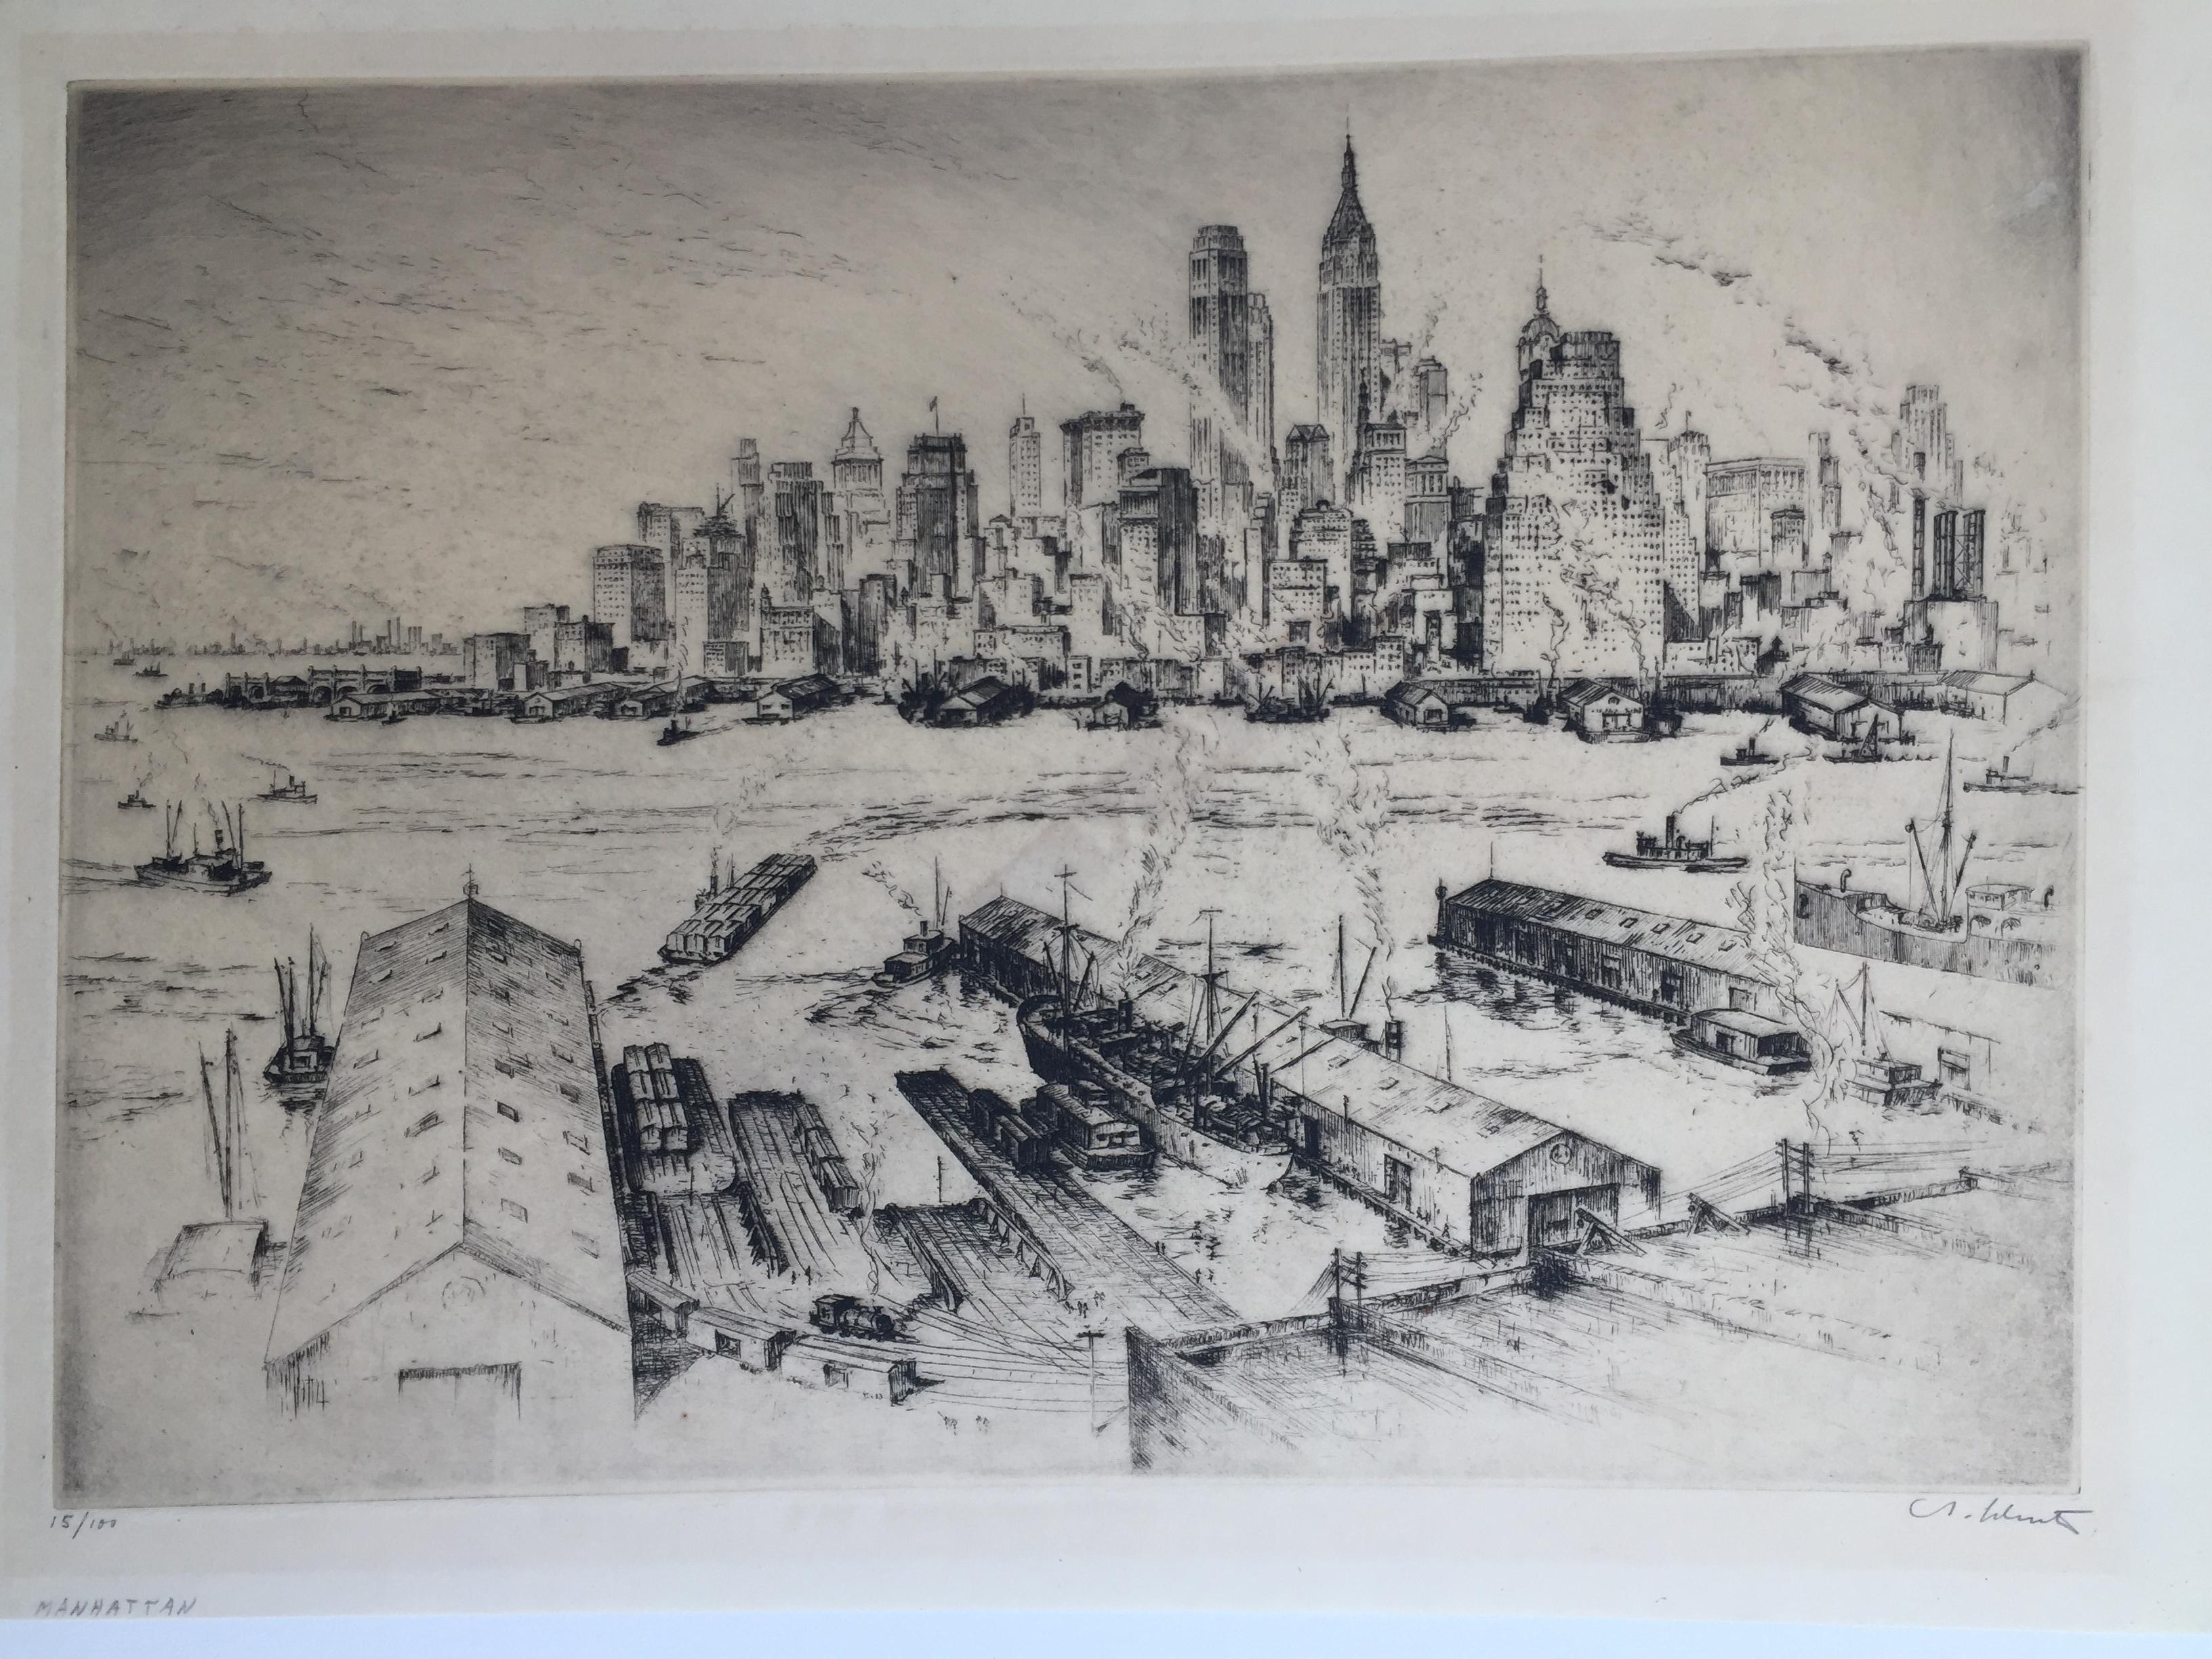 ANTON SCHUTZ

MANHATTAN c 1940 
Etching, signed in pencil, edition 100, no. 15/100. On thin simili-japan paper. Very slight toning around plate mark. Remnants of old tape on verso, small scuff in upper sky, otherwise good.  Nice view of New York.